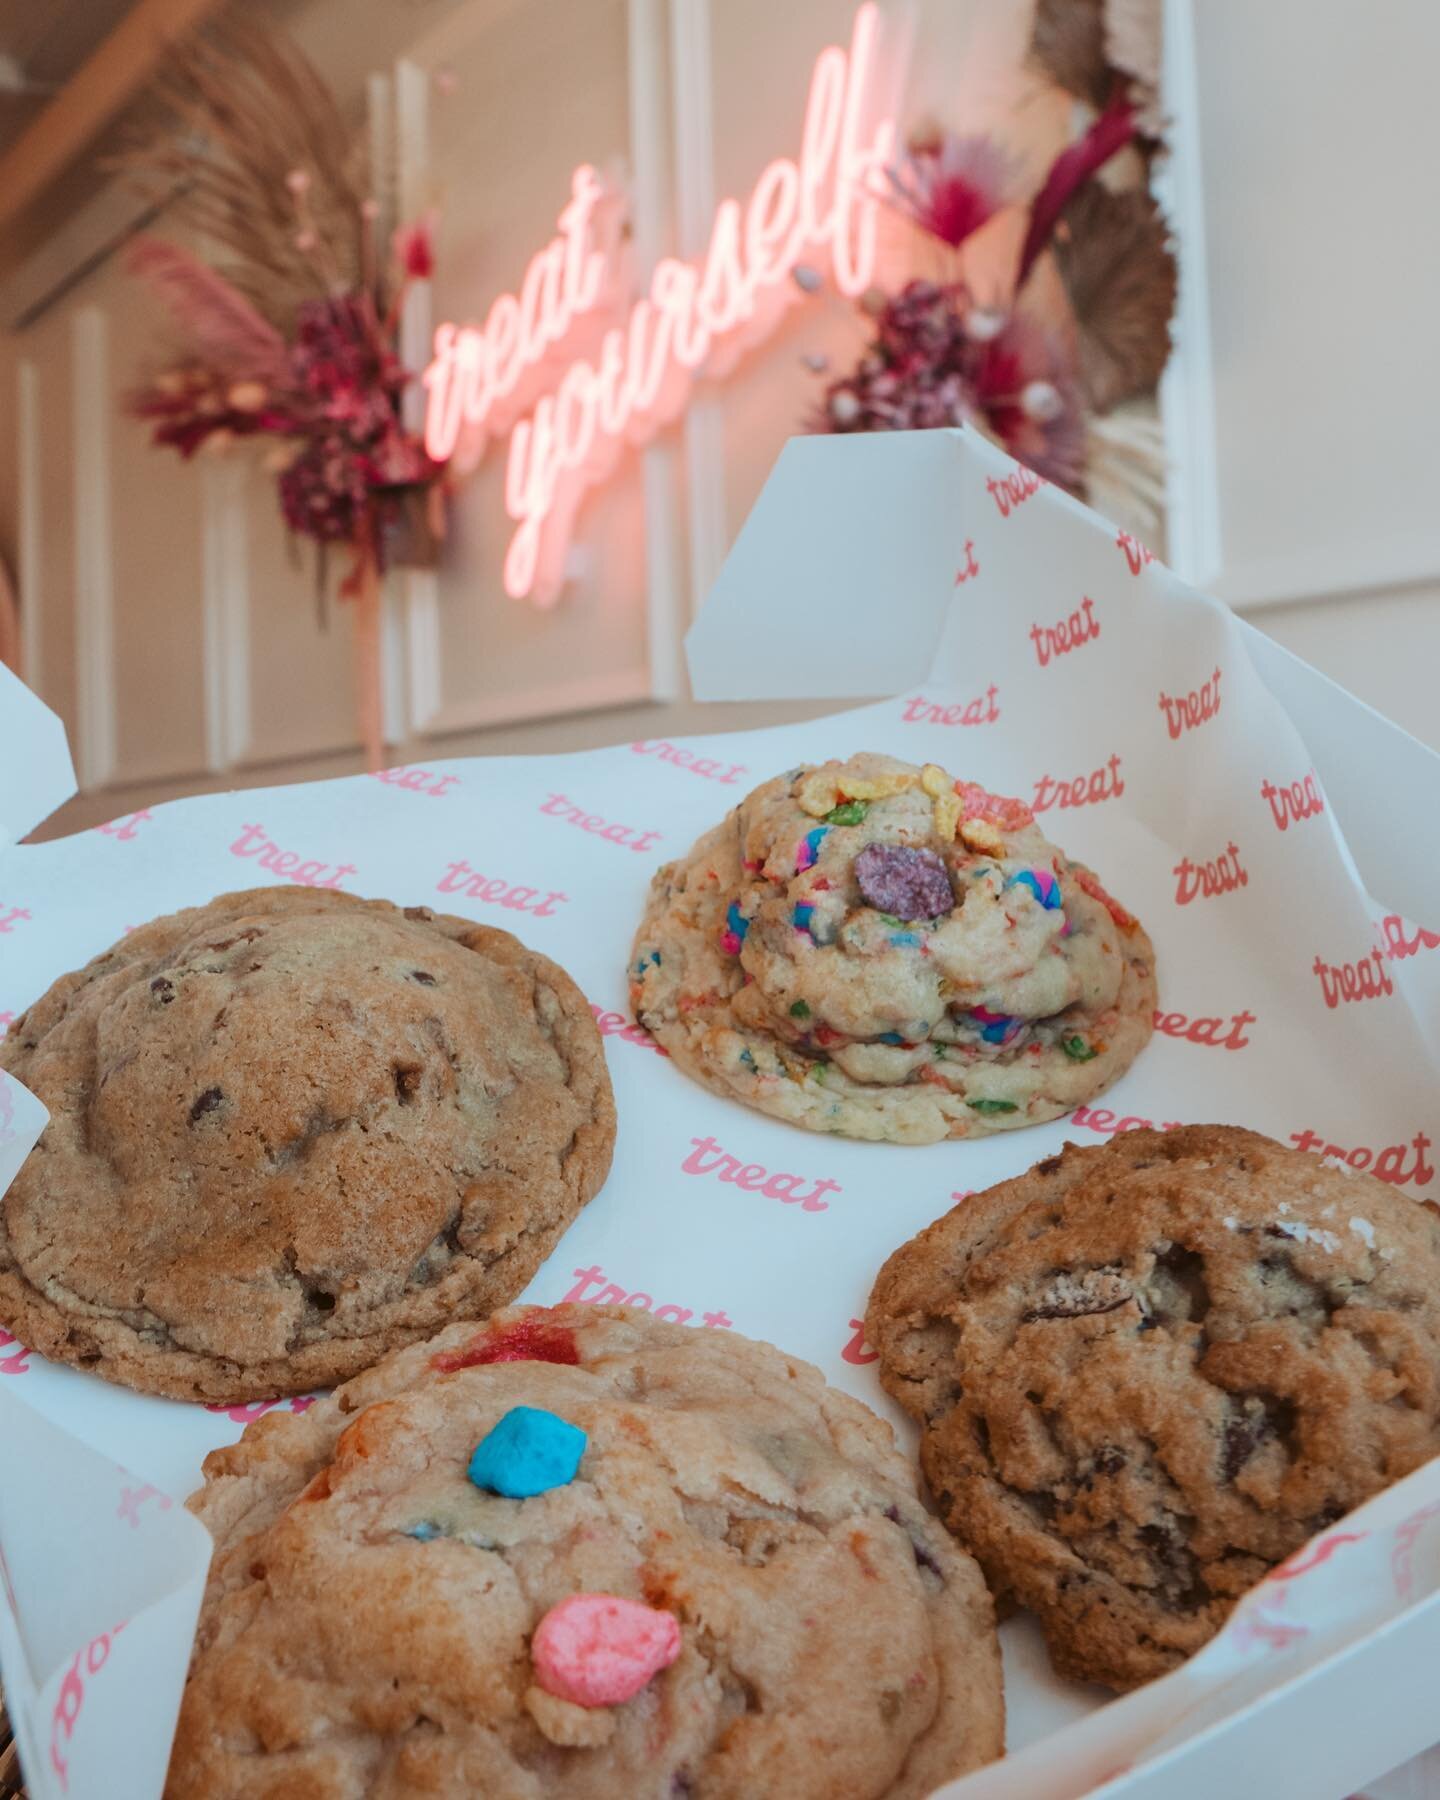 📍Burien - @treat_cookies 
🚨NEW DESSERT SHOP 🚨

Newly opened in Burien and through the heart-shaped doorway into the kitchen, @treat_cookies bakes batches of cookies with lovingly affection. 

Each of their cookies has a name. From Madison, a delig